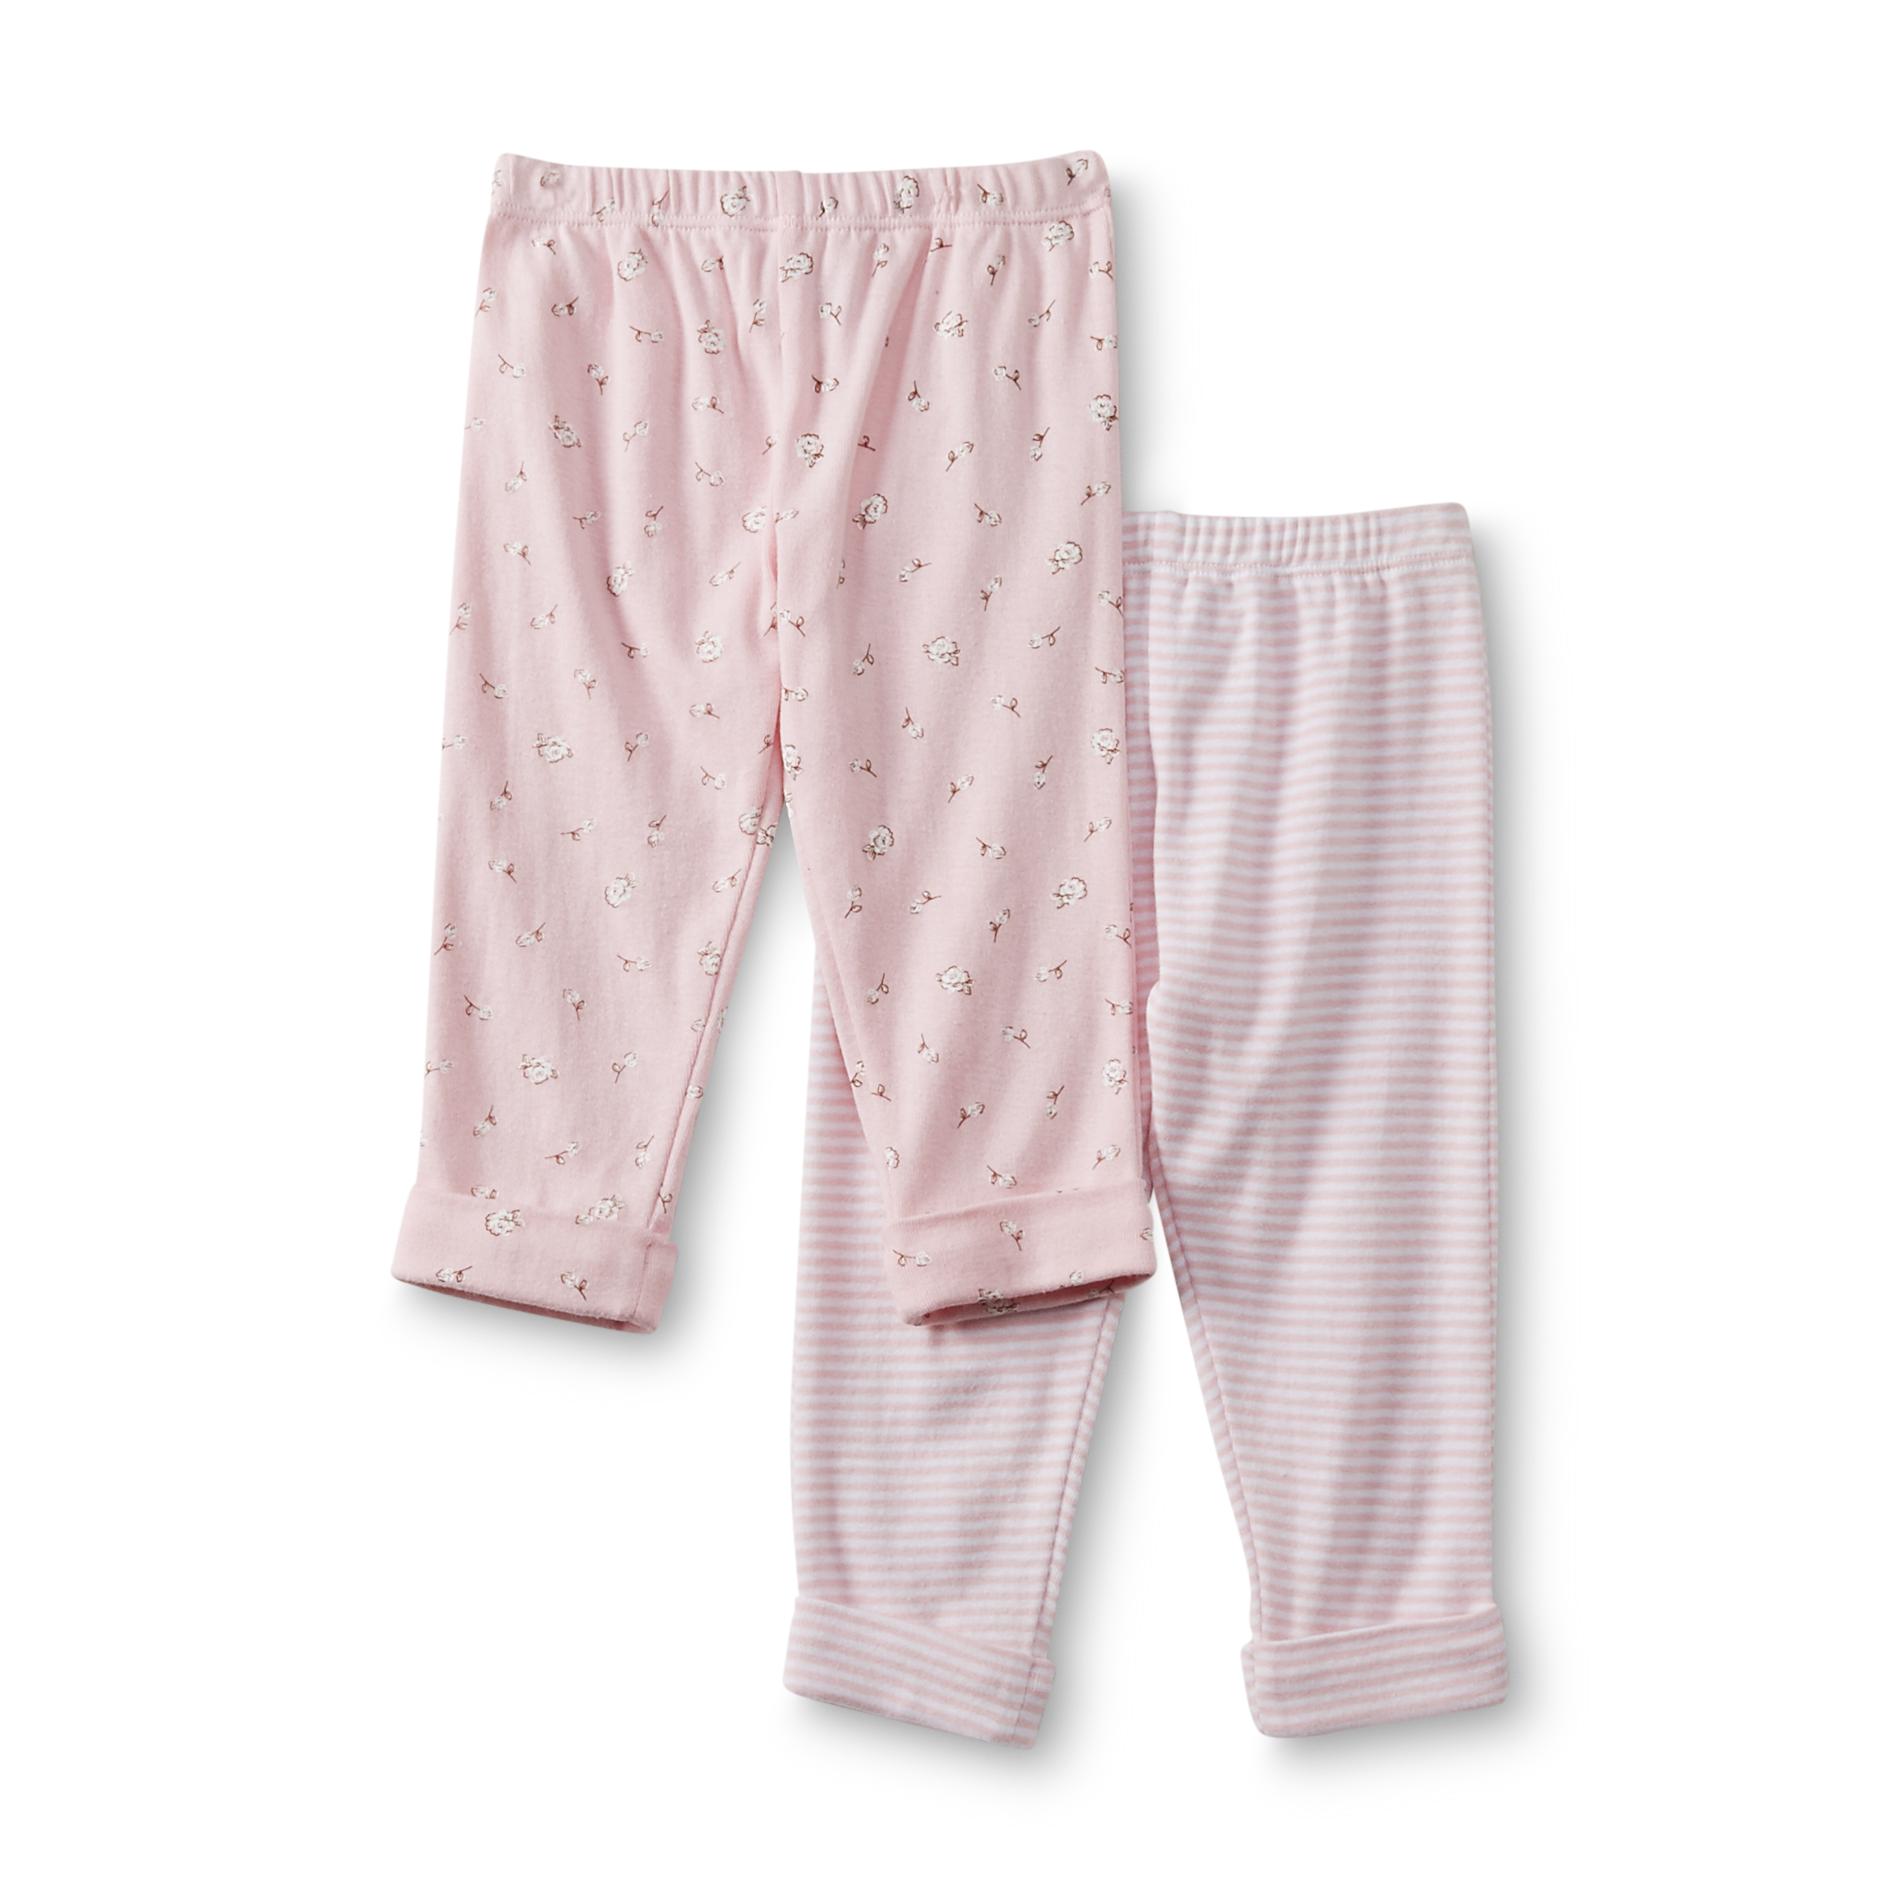 Welcome to the World Newborn Girl's 2-Pack Knit Pants - Striped & Floral